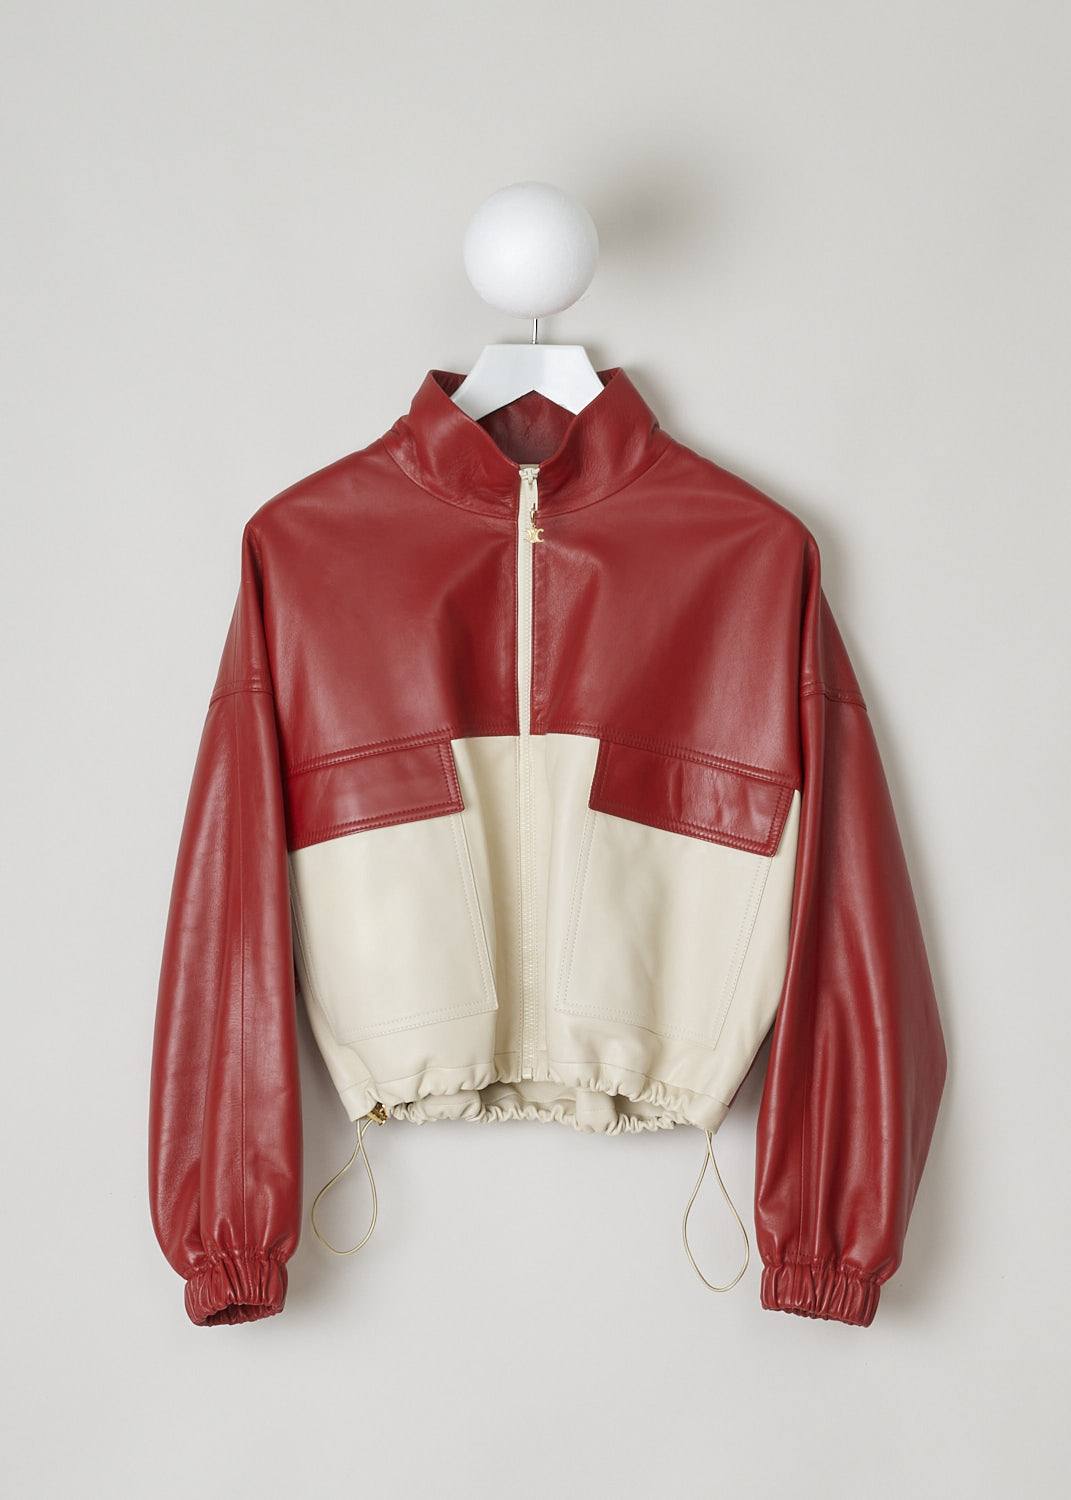 CELINE, TWO-TONE CROPPED LEATHER JACKET, 150T_2EE13_27LV, Red, Beige, Front, This cropped leather jacket is  two-toned, with the top half in lipstick red and the bottom half and the back in off-white. The jacket has a stand-up collar, two patch pockets with flap and a zipper in a matching off-white color. The gold-tone pull-tab is shaped in the brand's logo. The long sleeves have elasticated cuffs. The elasticated hemline has gold-tone cord locks on the inside. The jackets has a single inner pocket


